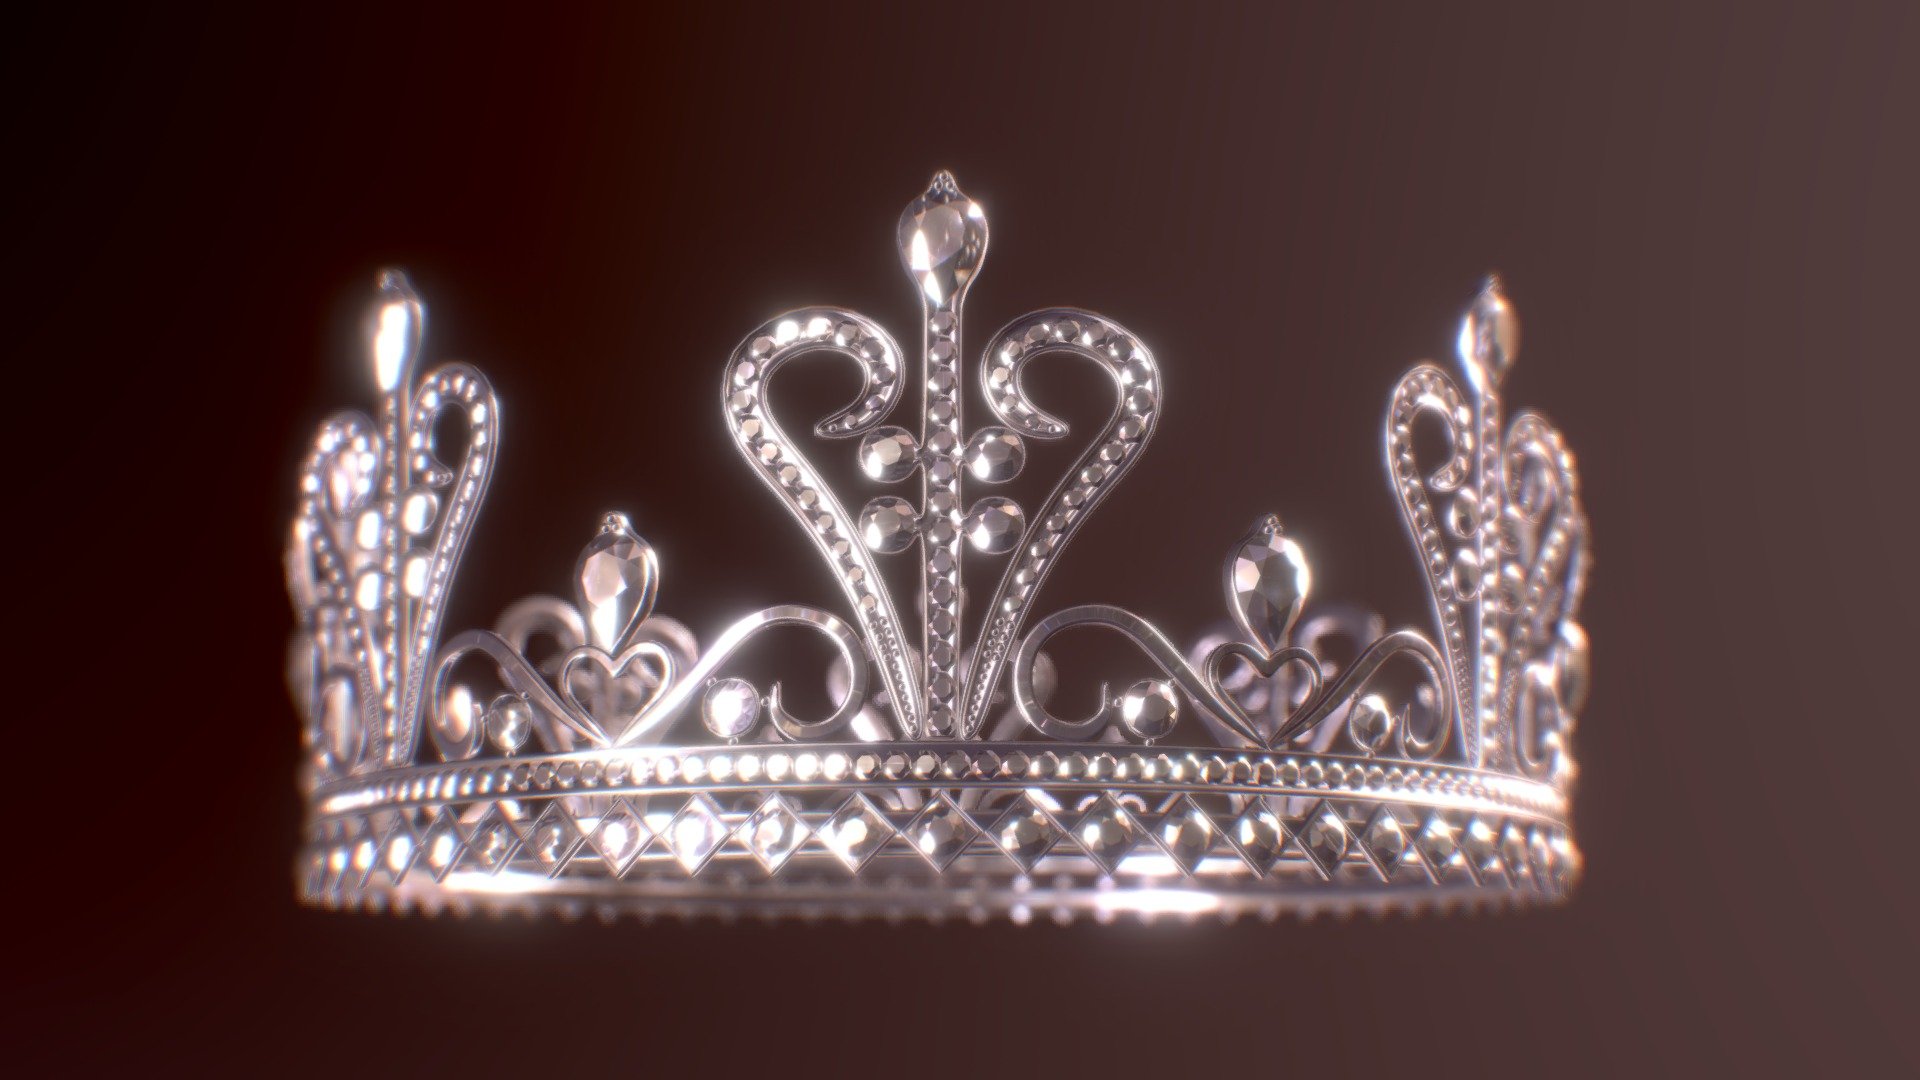 Crown 3D object model in .obj format. Generic materials are included in .mtl file. For best results tweak your own render engine and materials. You also might be interested in other my tiara and crown models: https://sketchfab.com/sk-pro/collections/tiaras , https://sketchfab.com/sk-pro/collections/crowns . Best Regards 3d model